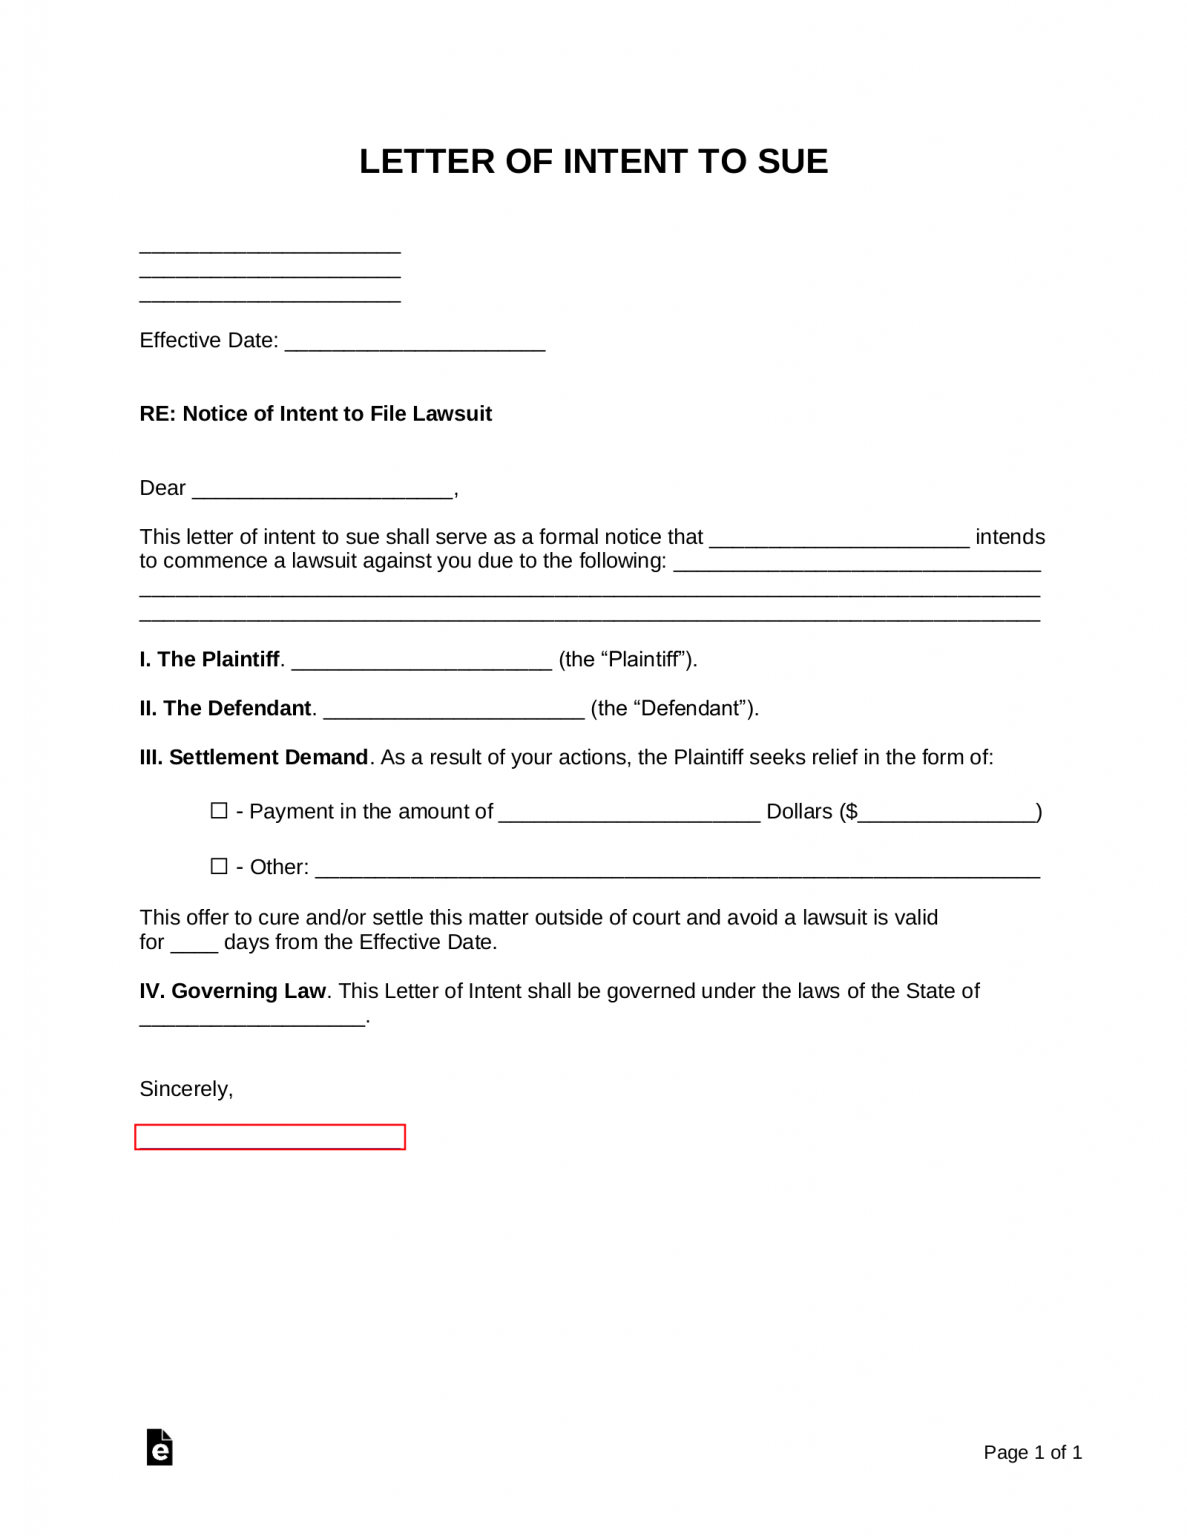 Free Letter of Intent to Sue (with Settlement Demand) Sample PDF